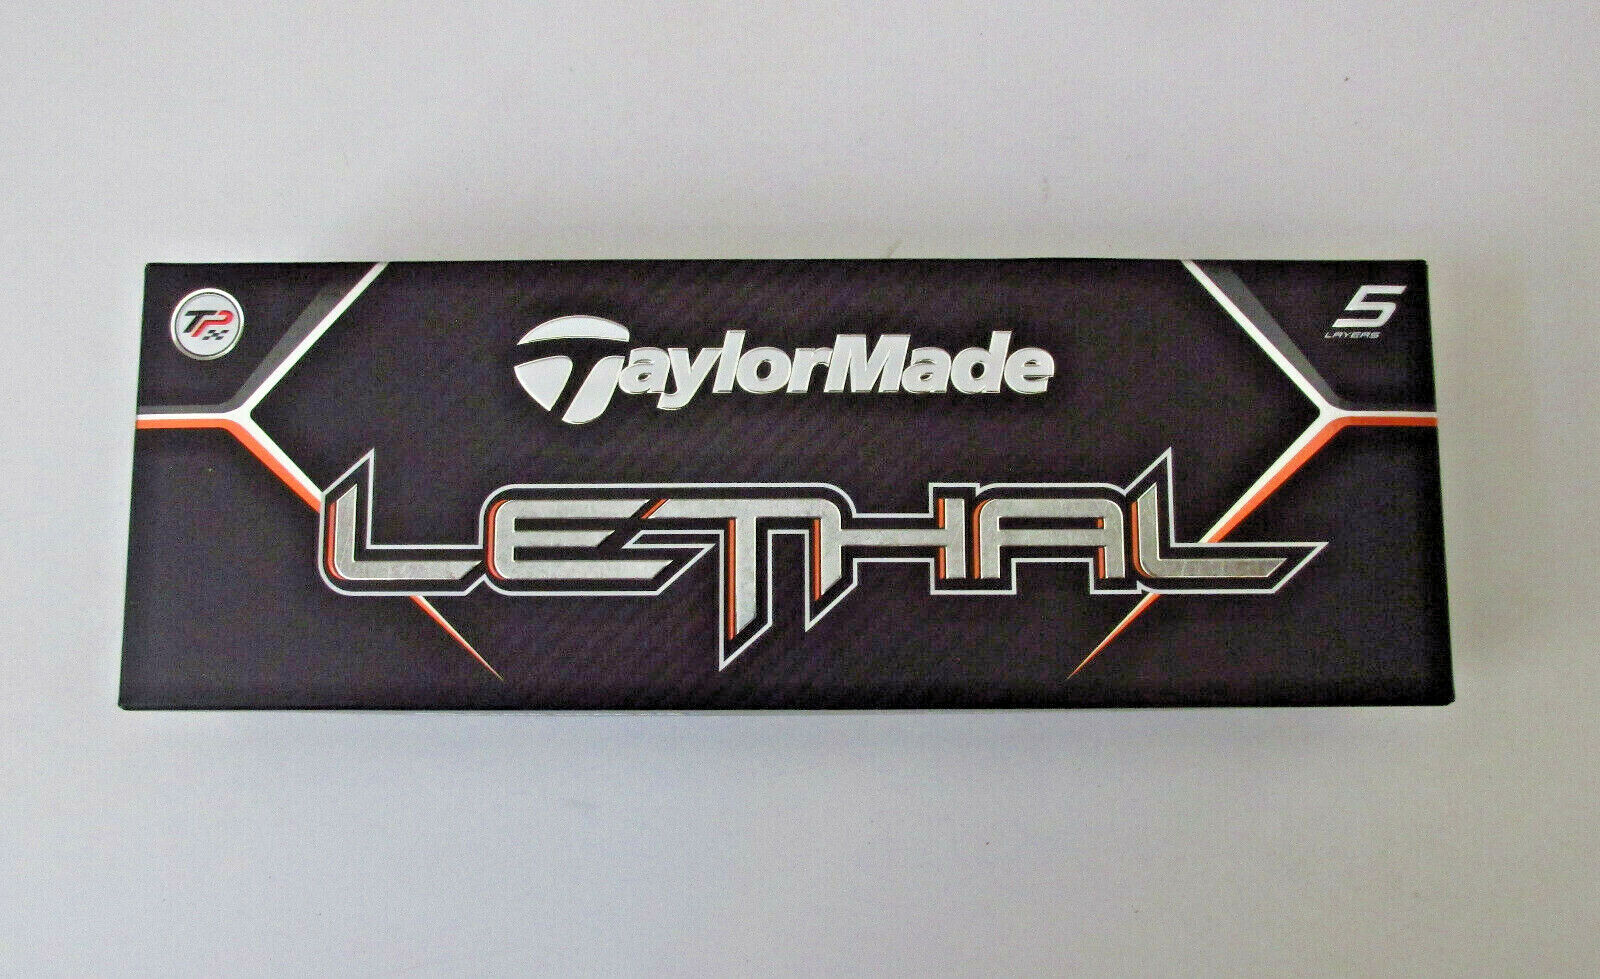 TaylorMade Lethal Golf Balls Four Sleeves (12 Total Balls) - Brand New